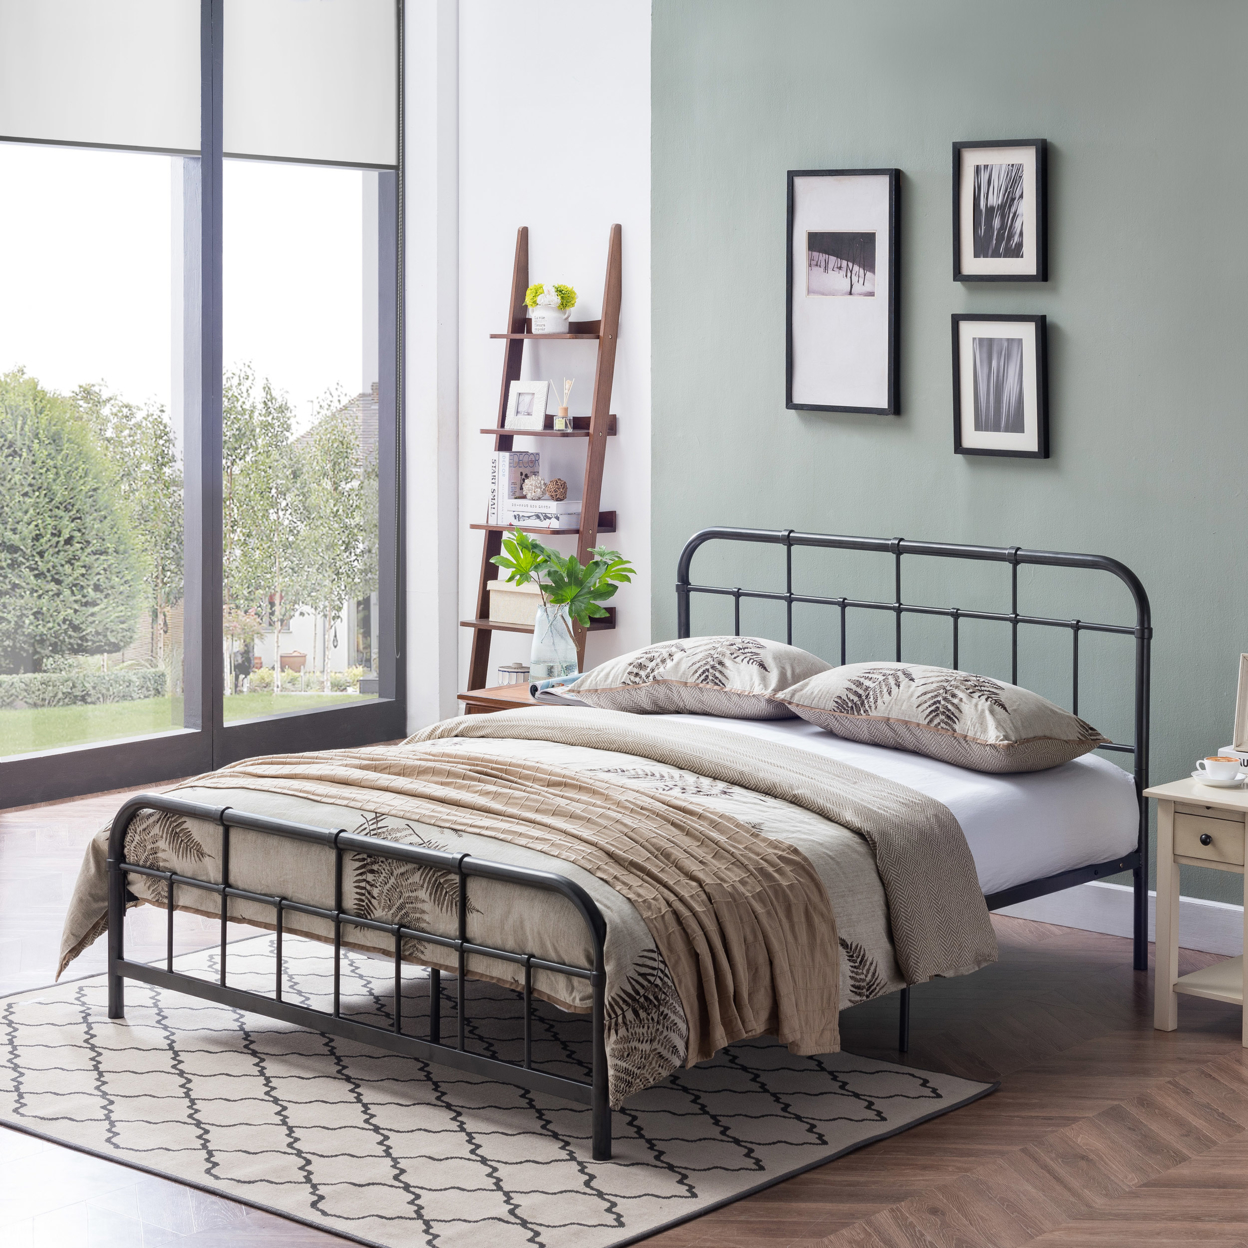 Sylvia Queen-Size Iron Bed Frame, Minimal, Industrial - Black